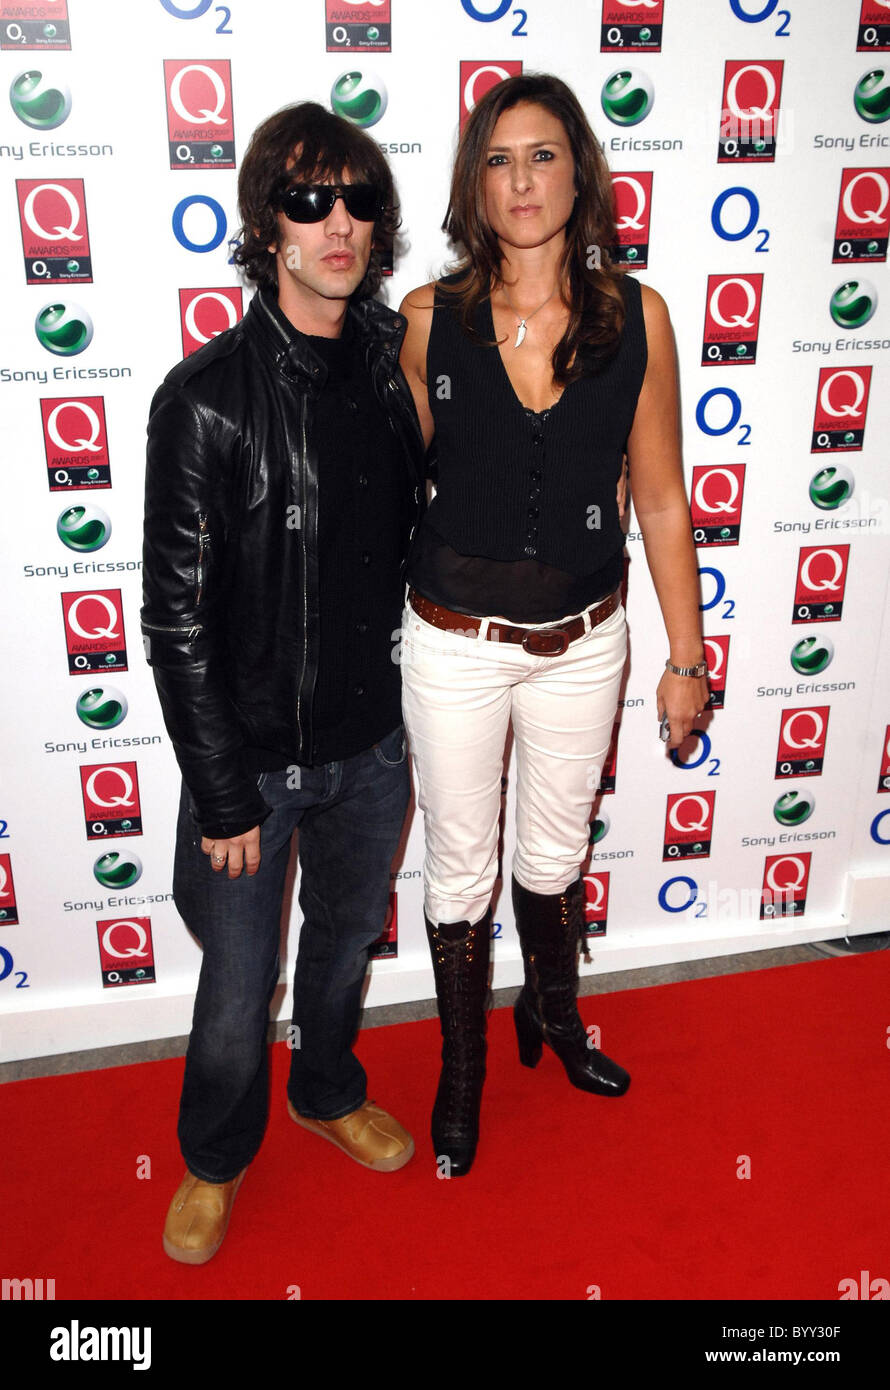 Richard Ashcroft and wife Kate Radley The Q Awards held at the Grosvenor  House - Arrivals London, England - 08.10.07 Stock Photo - Alamy